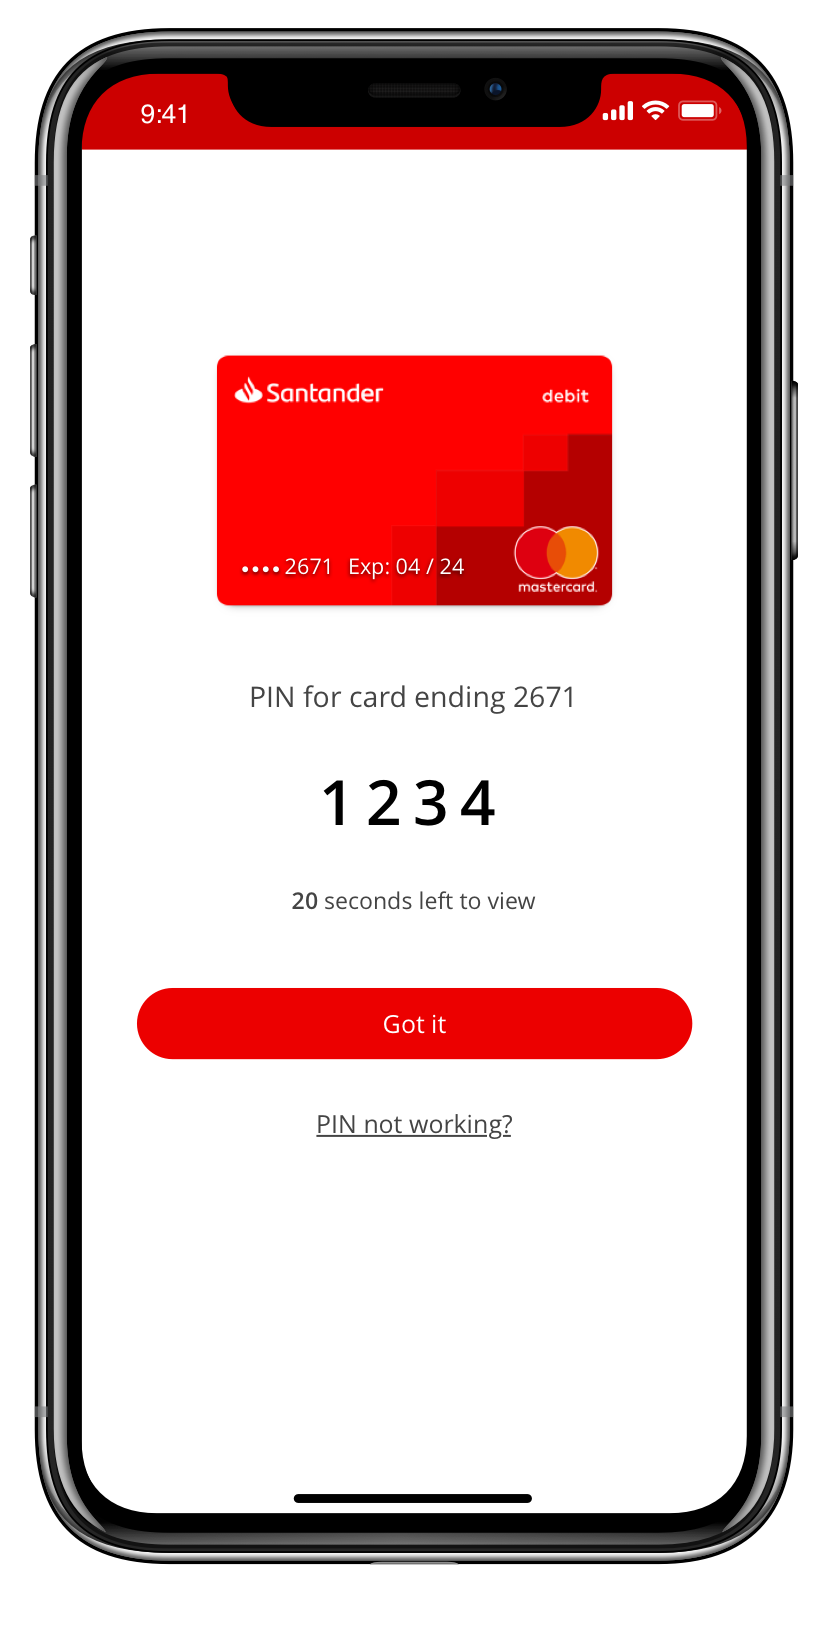 A screen in Mobile Banking showing a card’s PIN number with a maximum of 20 seconds to view.